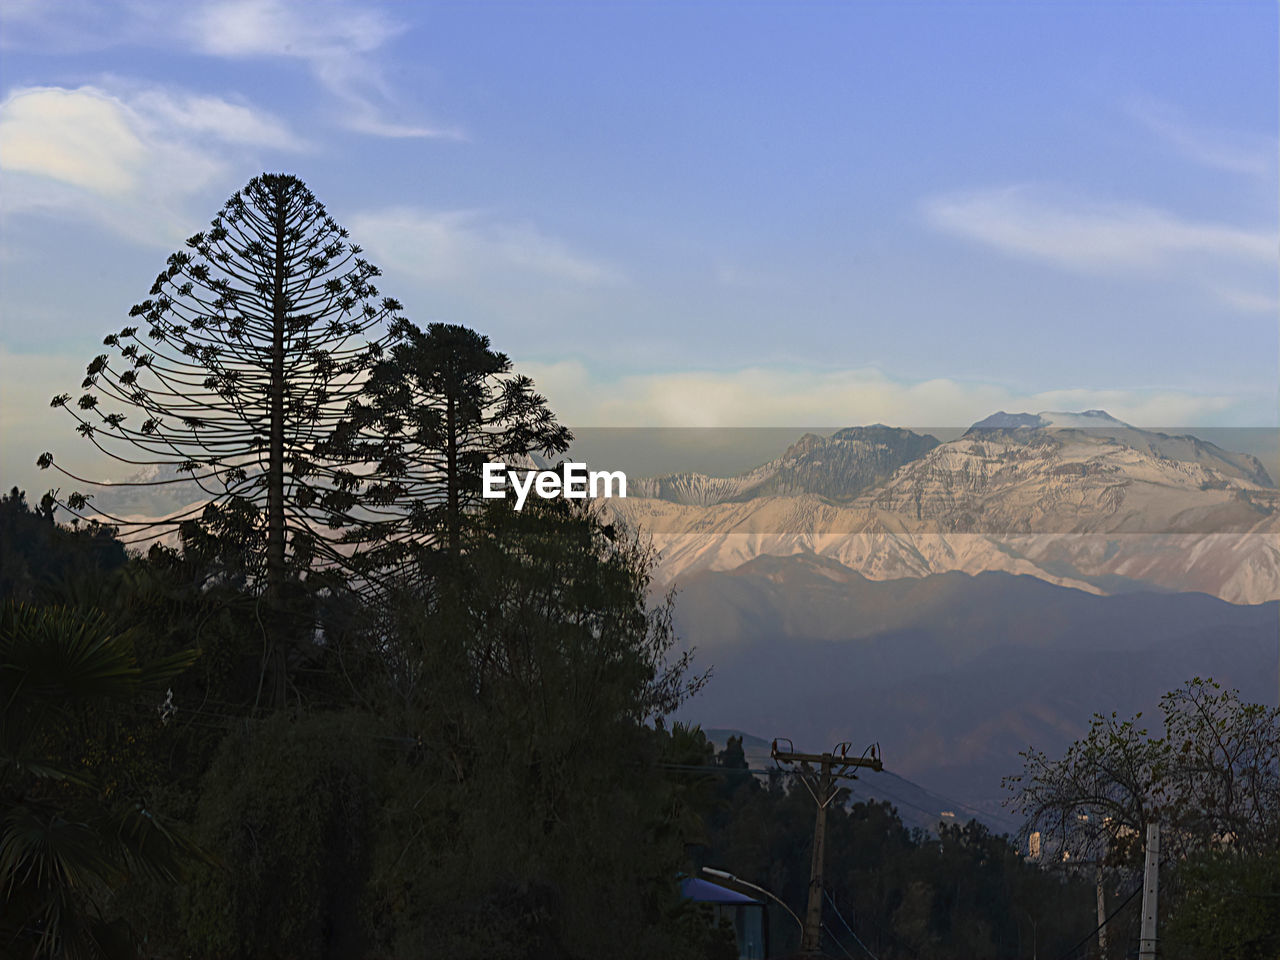 mountain, sky, nature, mountain range, scenics - nature, tree, beauty in nature, environment, landscape, plant, cloud, travel destinations, snow, travel, wilderness, mountain peak, land, no people, tourism, snowcapped mountain, tranquility, winter, outdoors, architecture, cold temperature, tranquil scene, pinaceae, forest, coniferous tree, pine tree, morning, non-urban scene, holiday, vacation